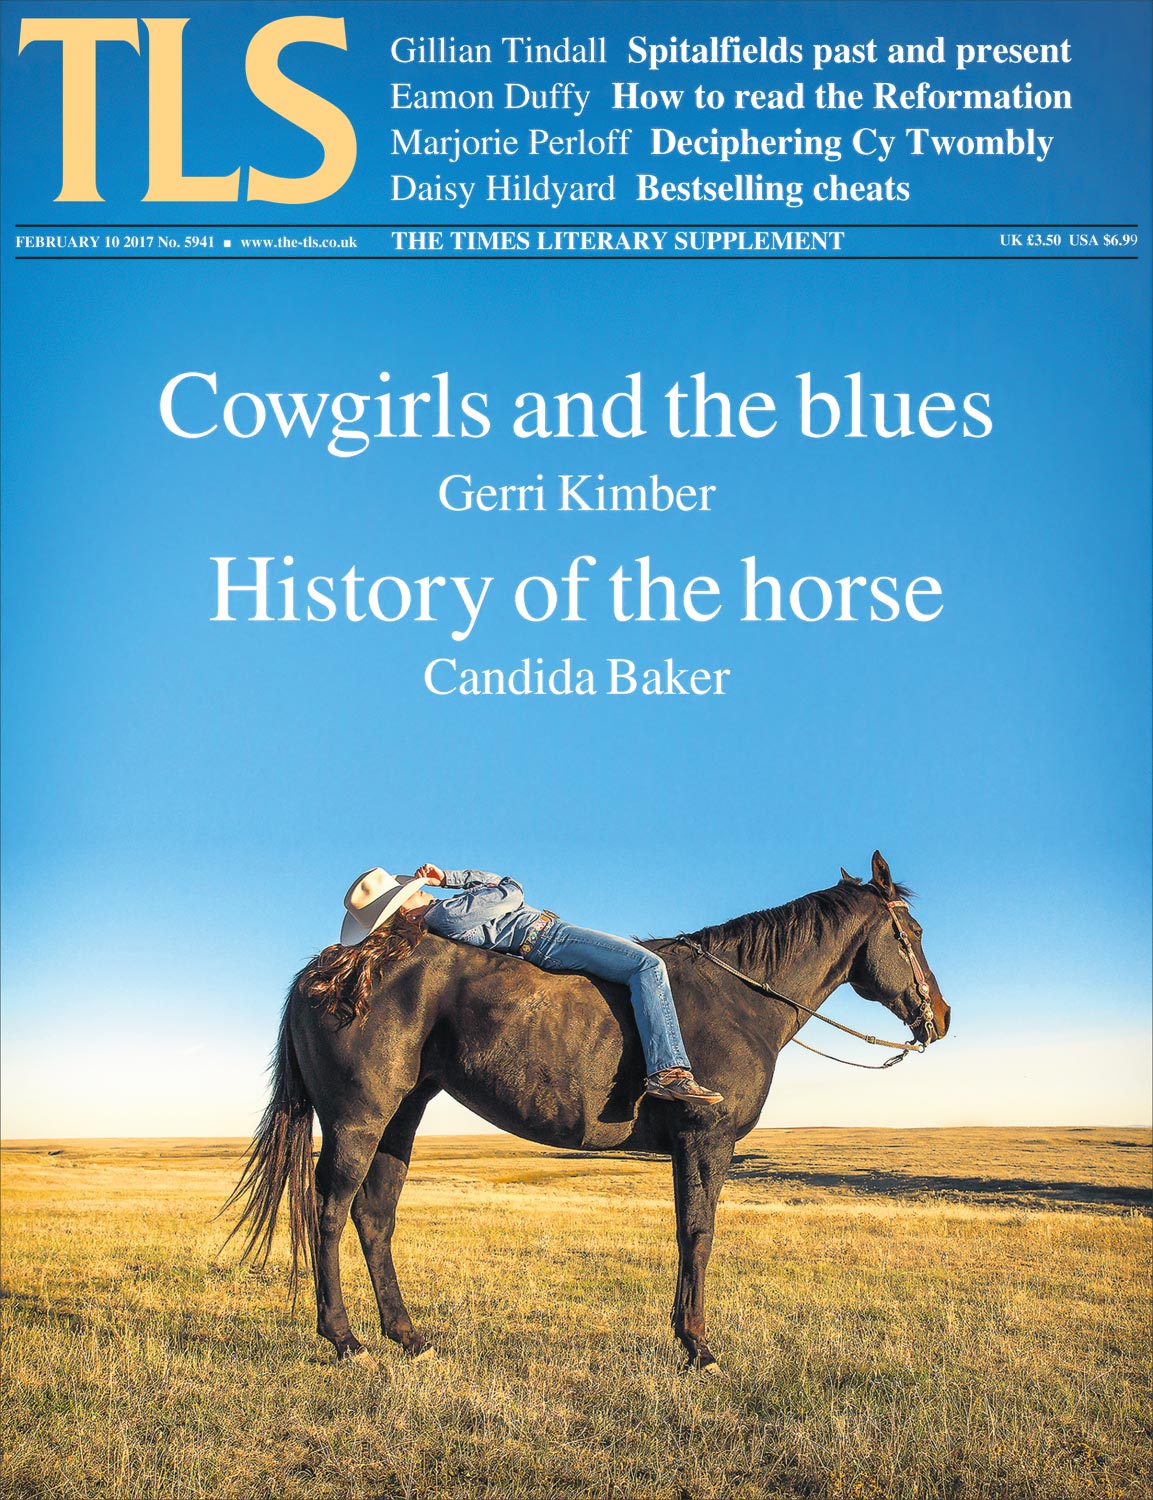 Cowgirl photo on the cover of The Times Literary Supplement